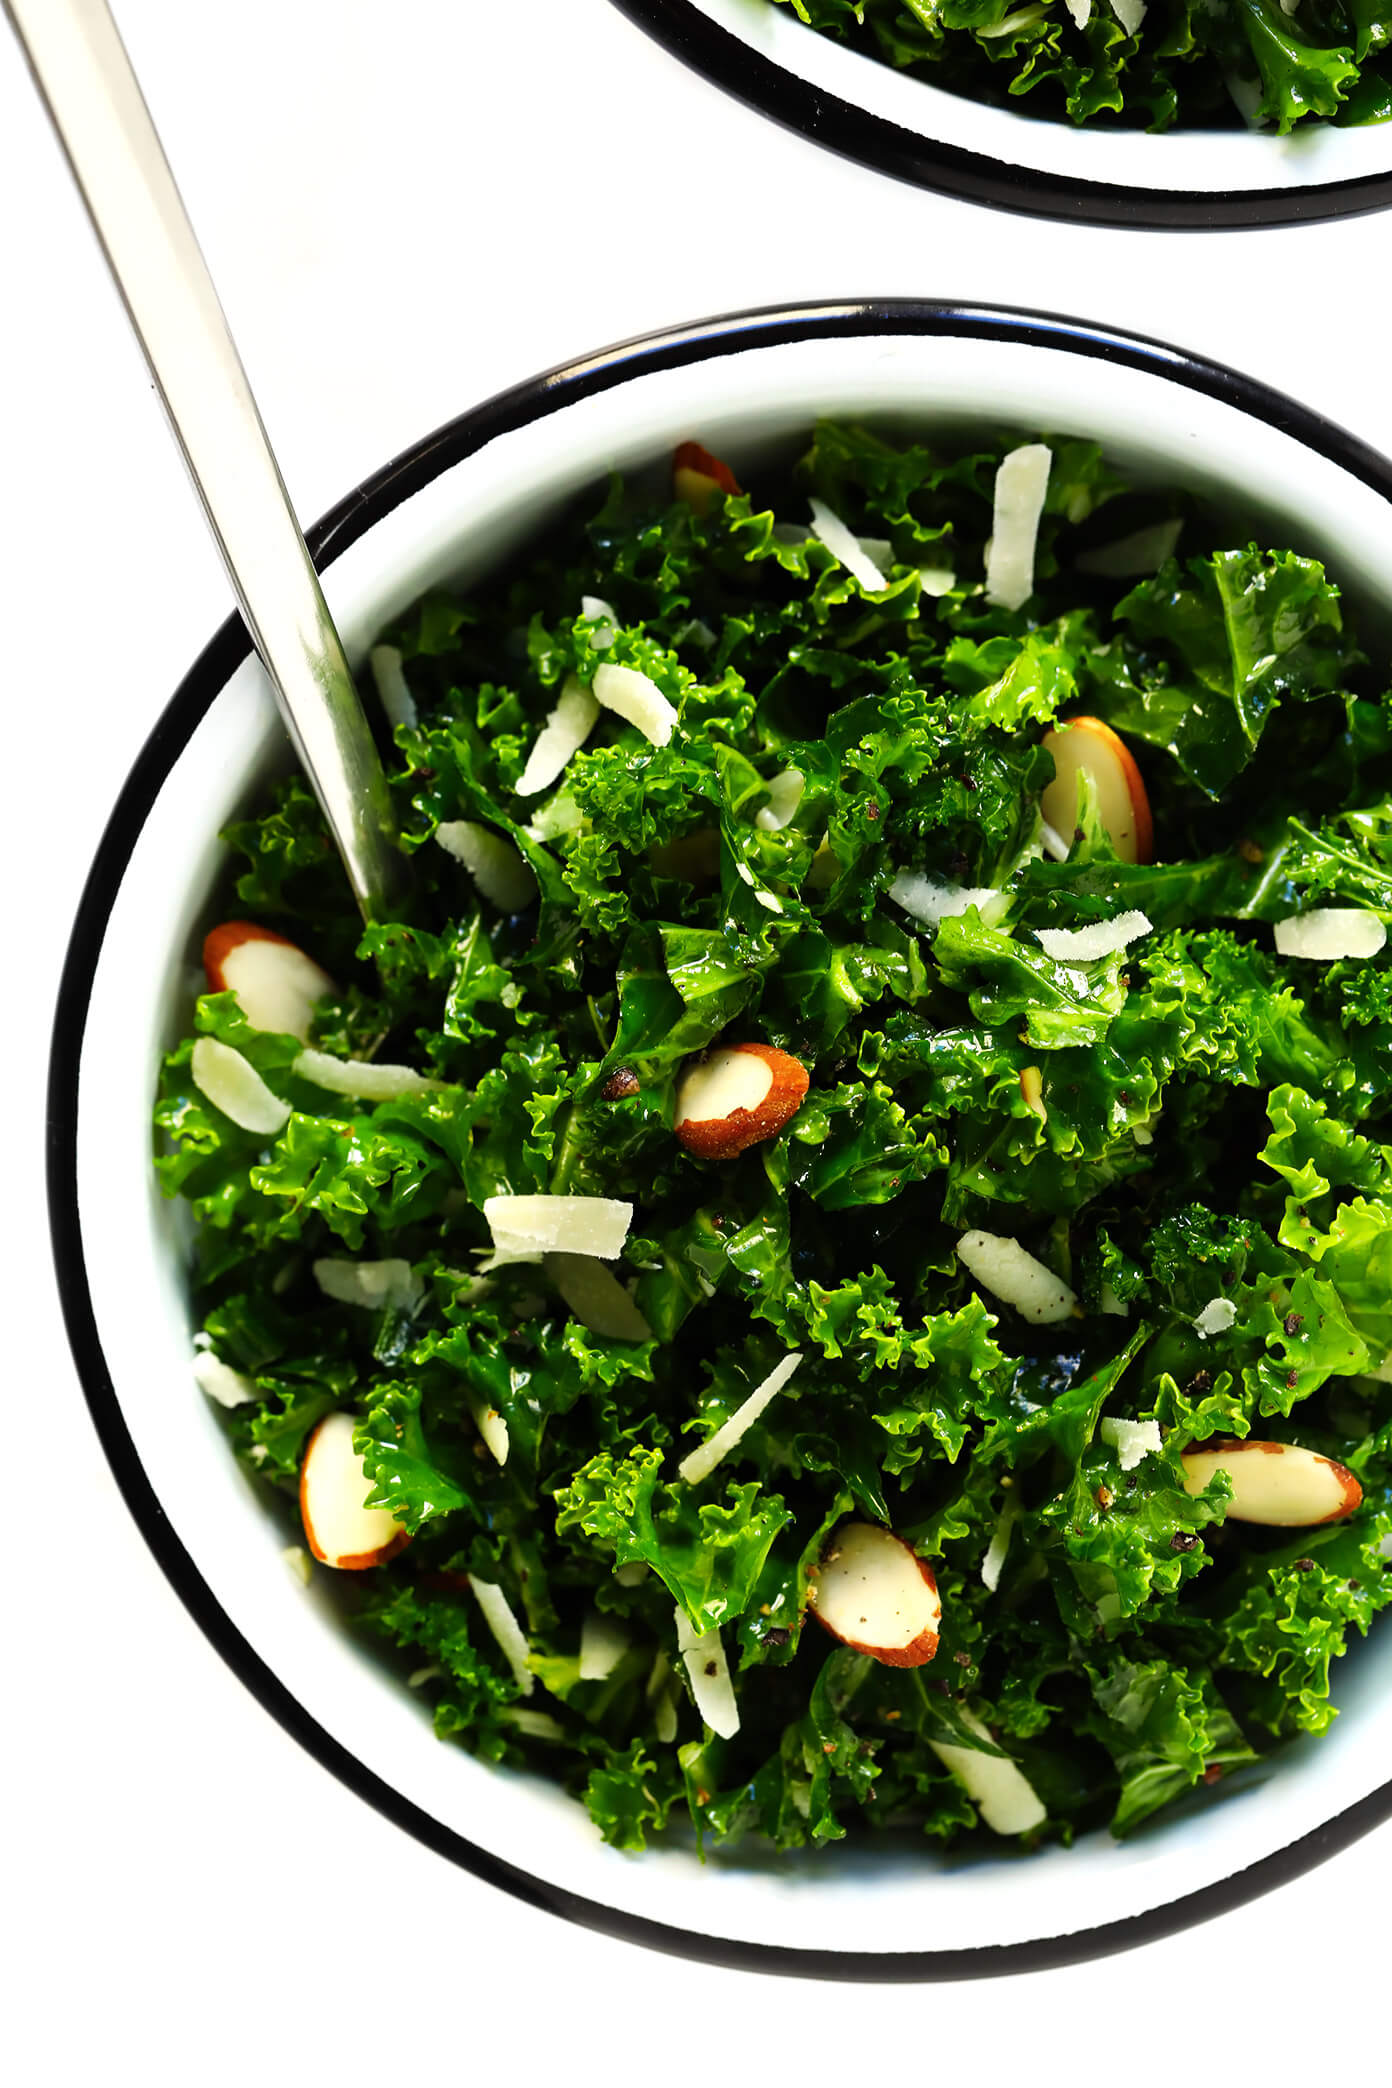 Kale Salad Recipe with Parmesan and Almonds